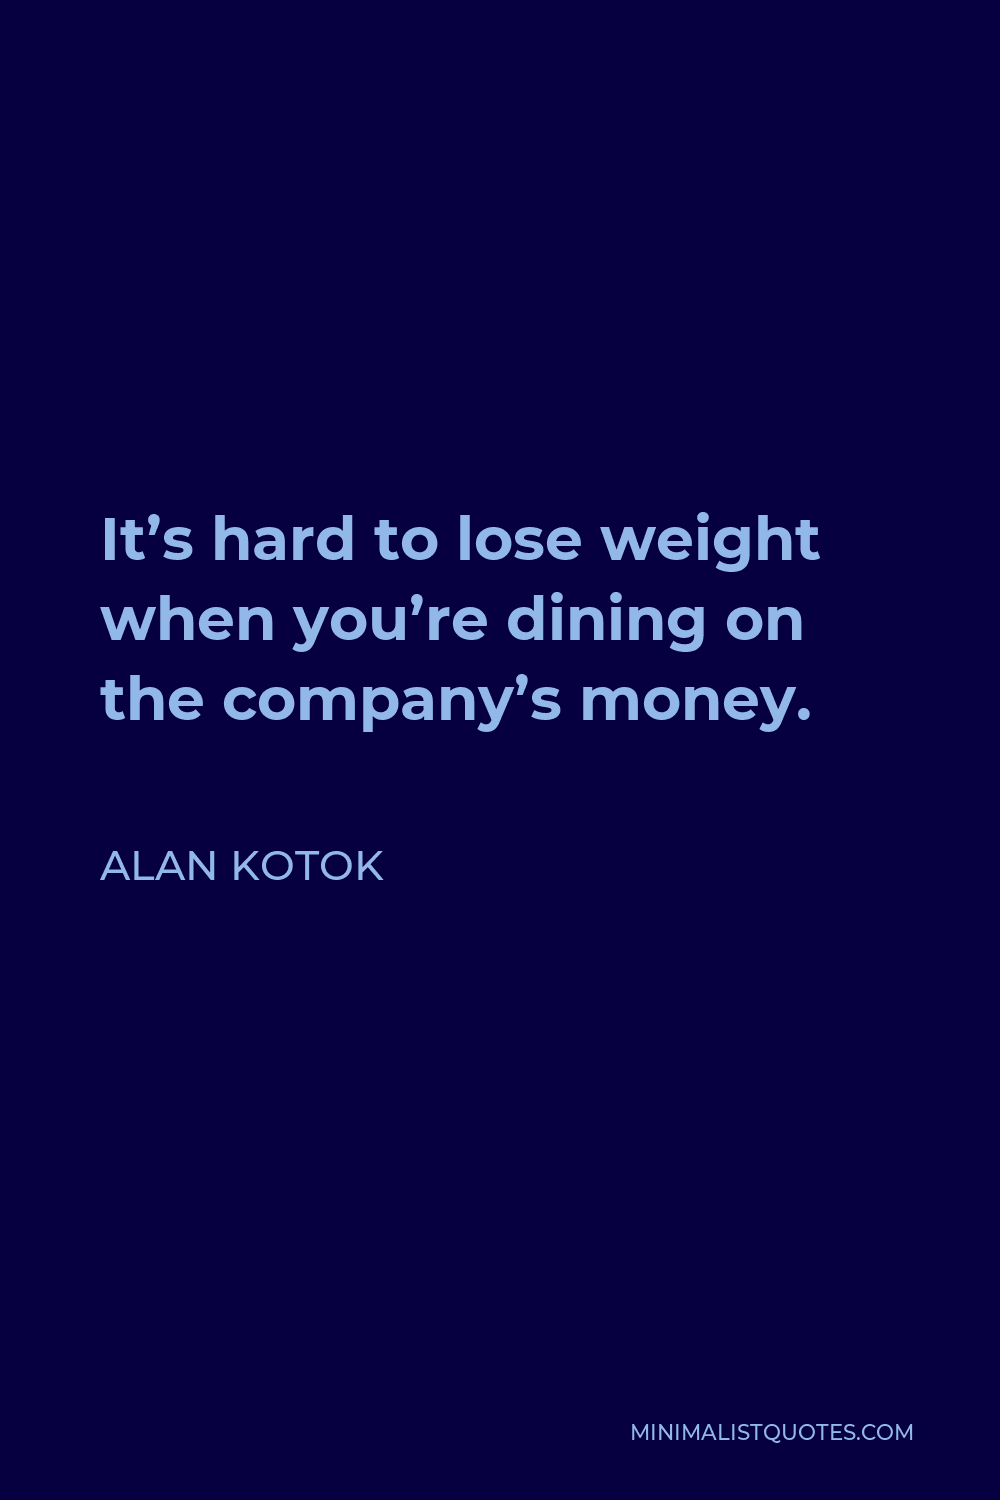 Alan Kotok Quote - It’s hard to lose weight when you’re dining on the company’s money.